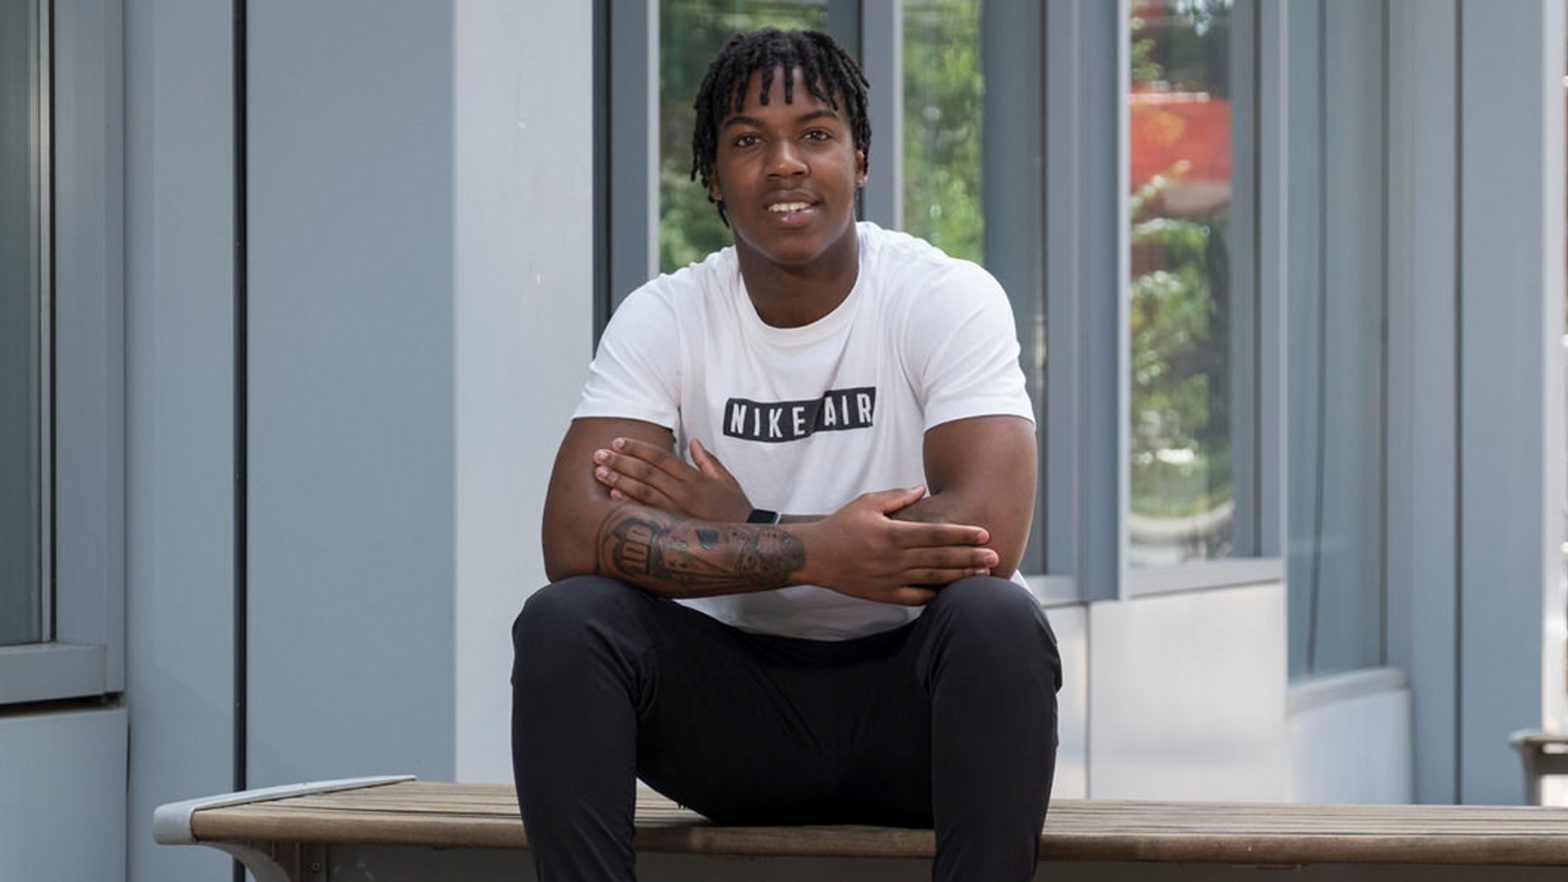 This Temple Student Is Balancing Business Classes And Being A Sneaker Cleaning Entrepreneur